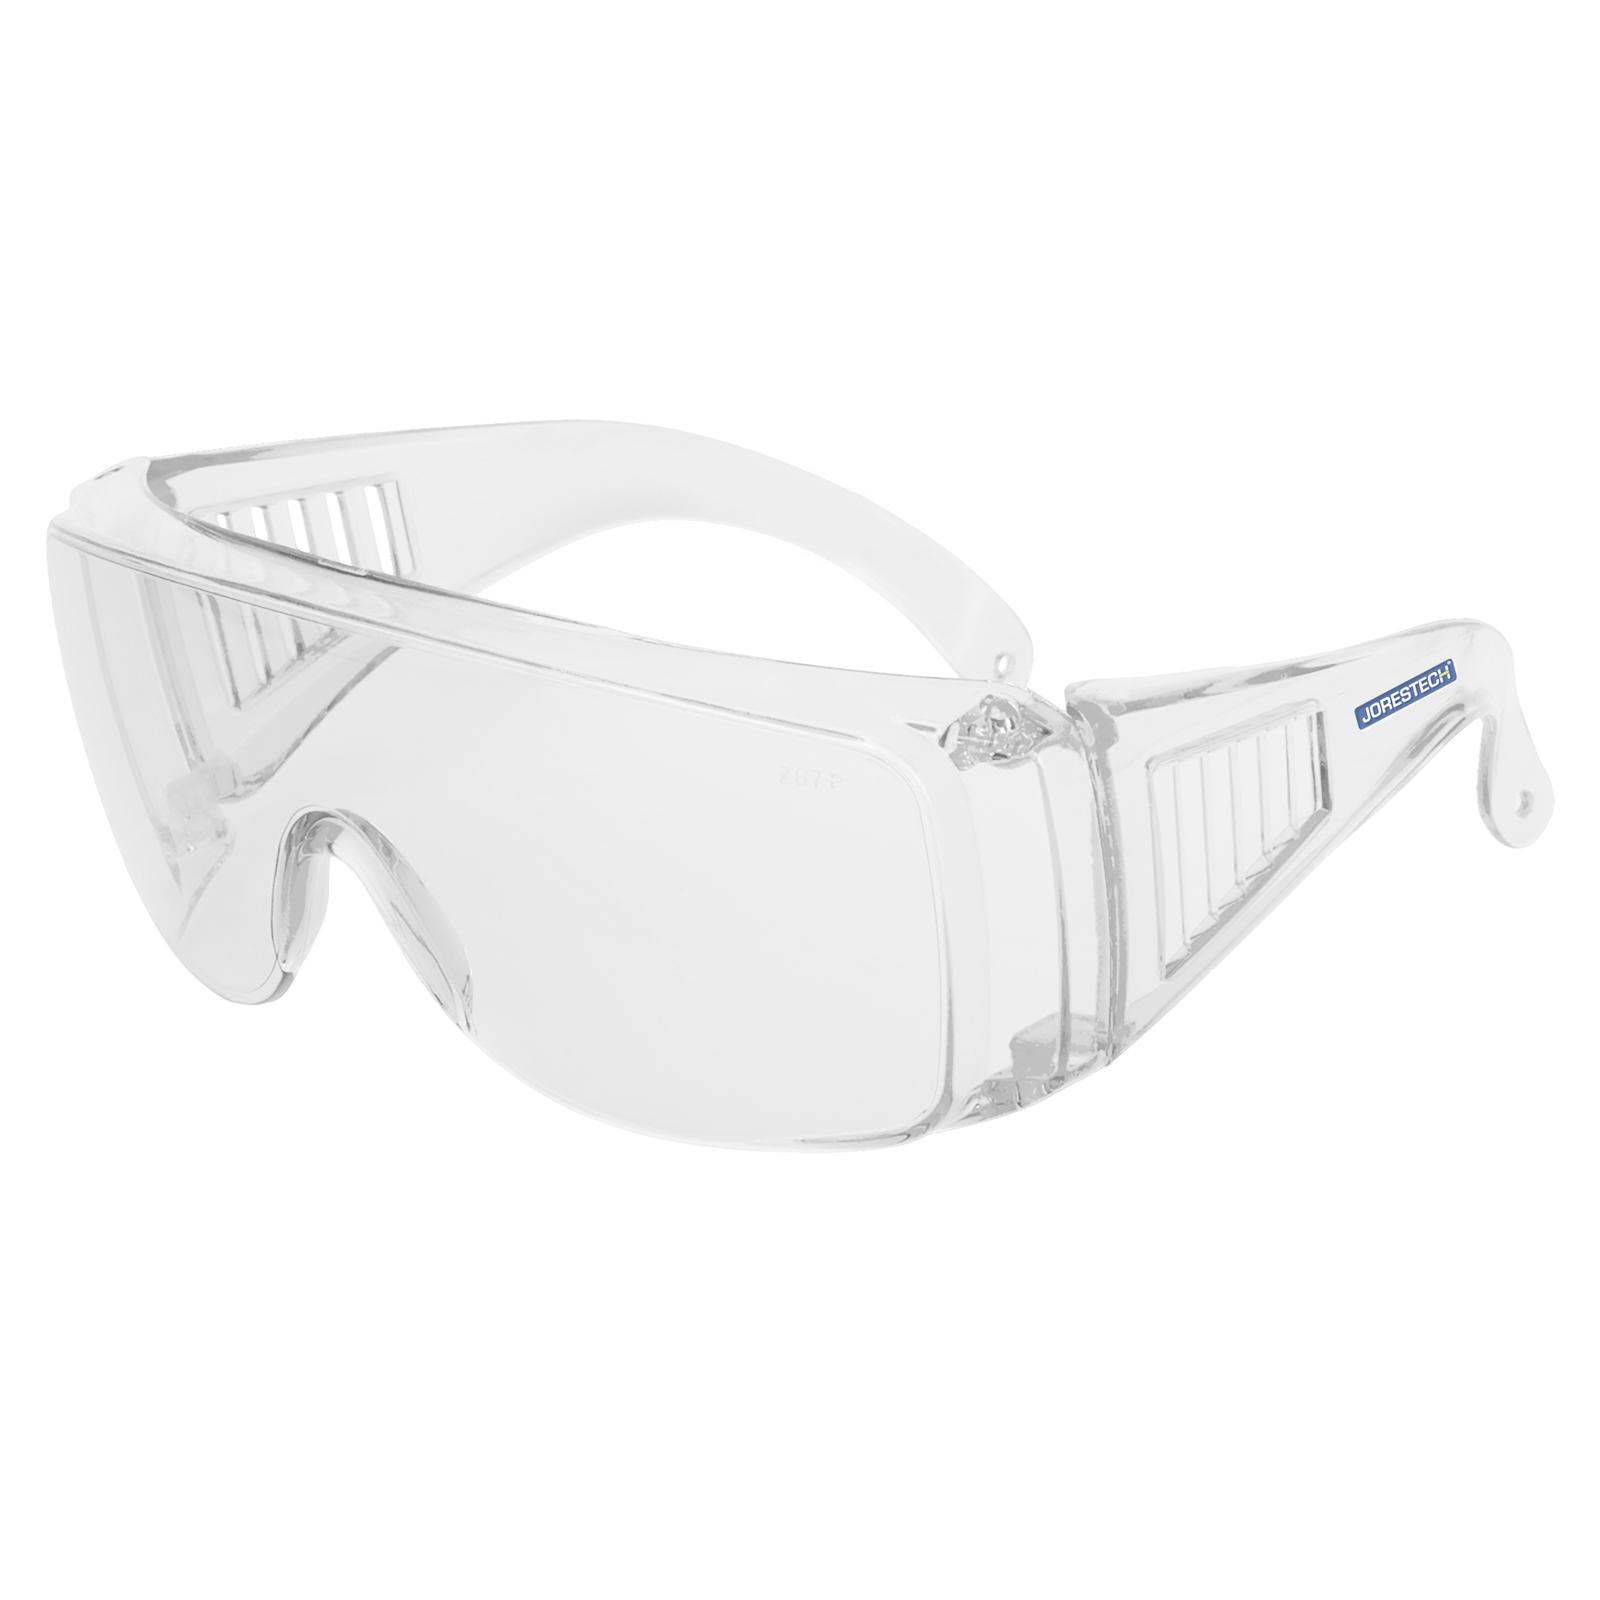 Clear Jorestech safety over glasses for high impact protection on a white background